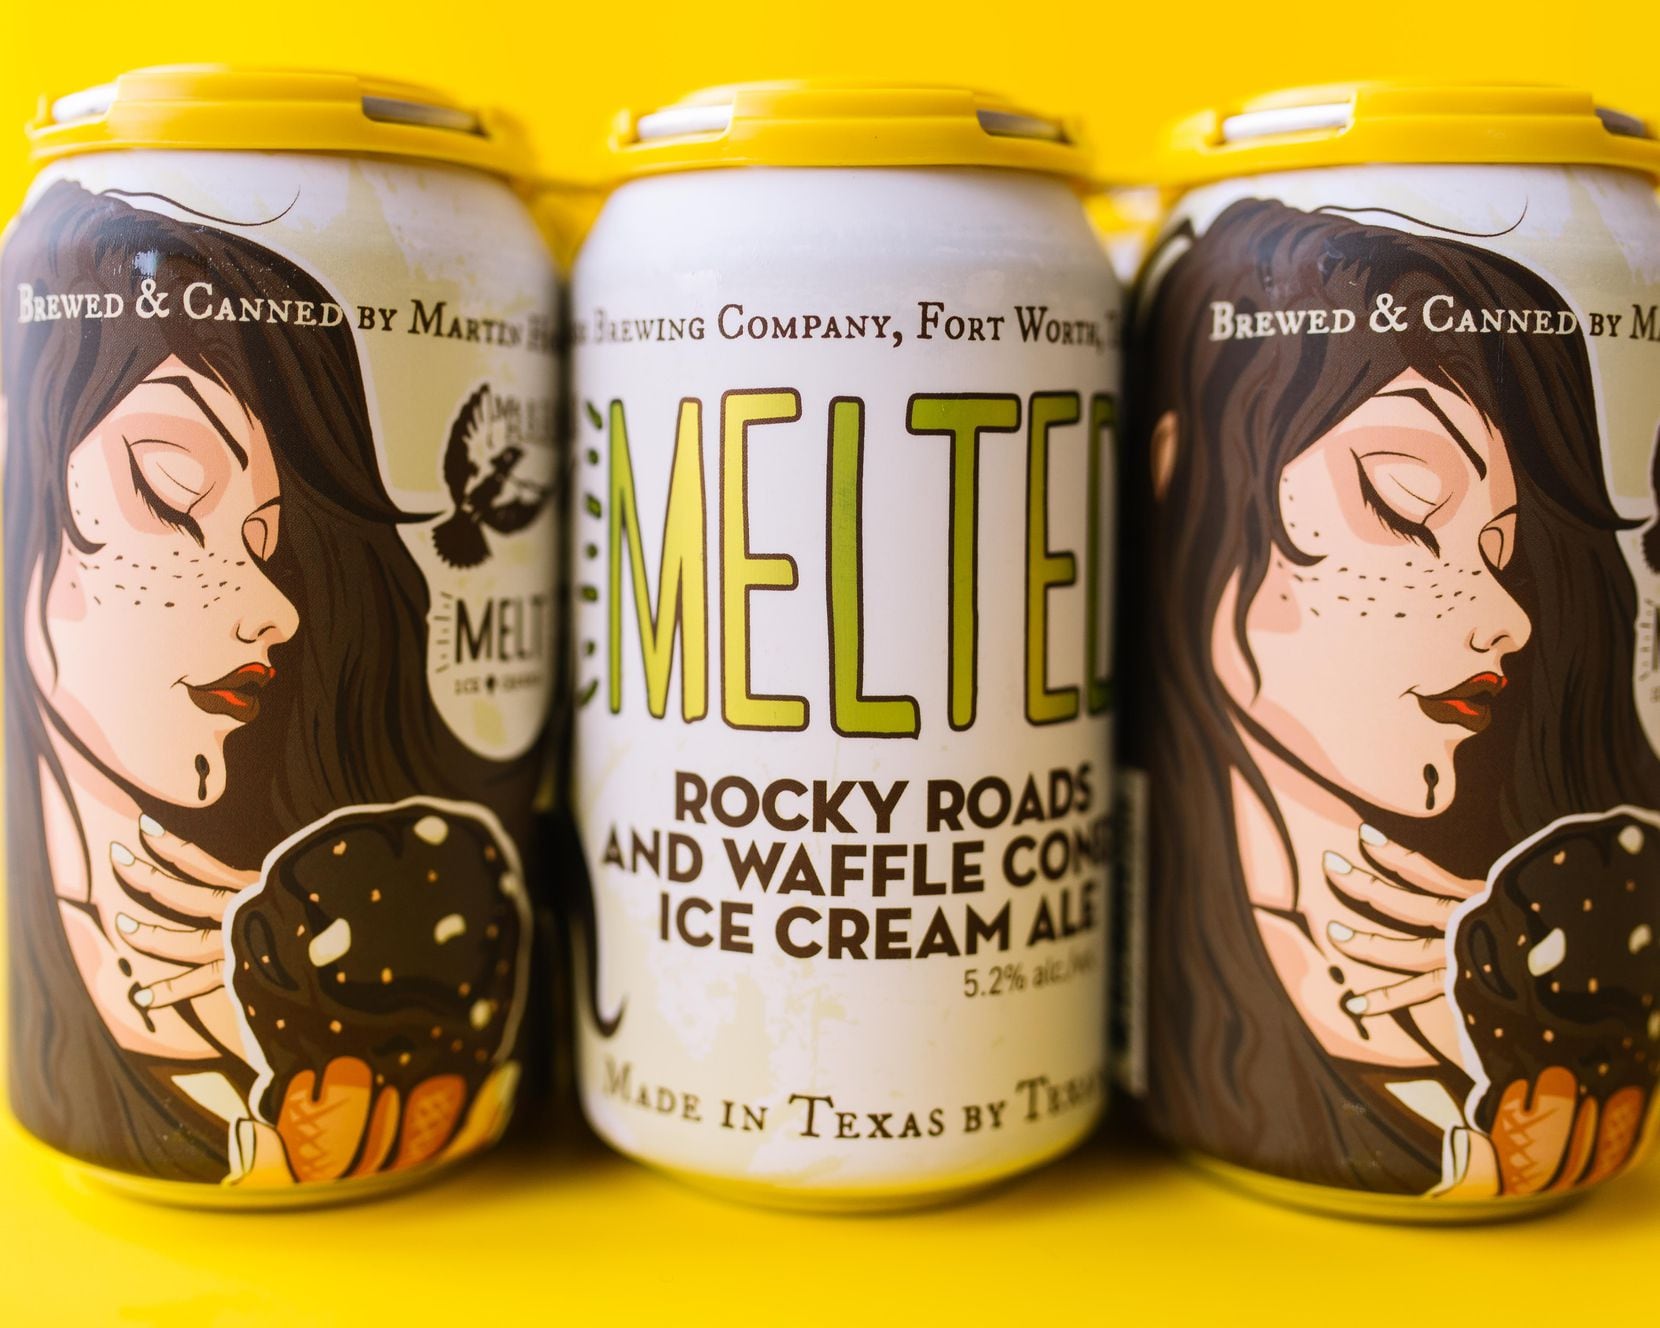 Melt Ice Creams and Martin House Brewing Co. launched Rocky Roads and Waffle Cones Ice Cream...